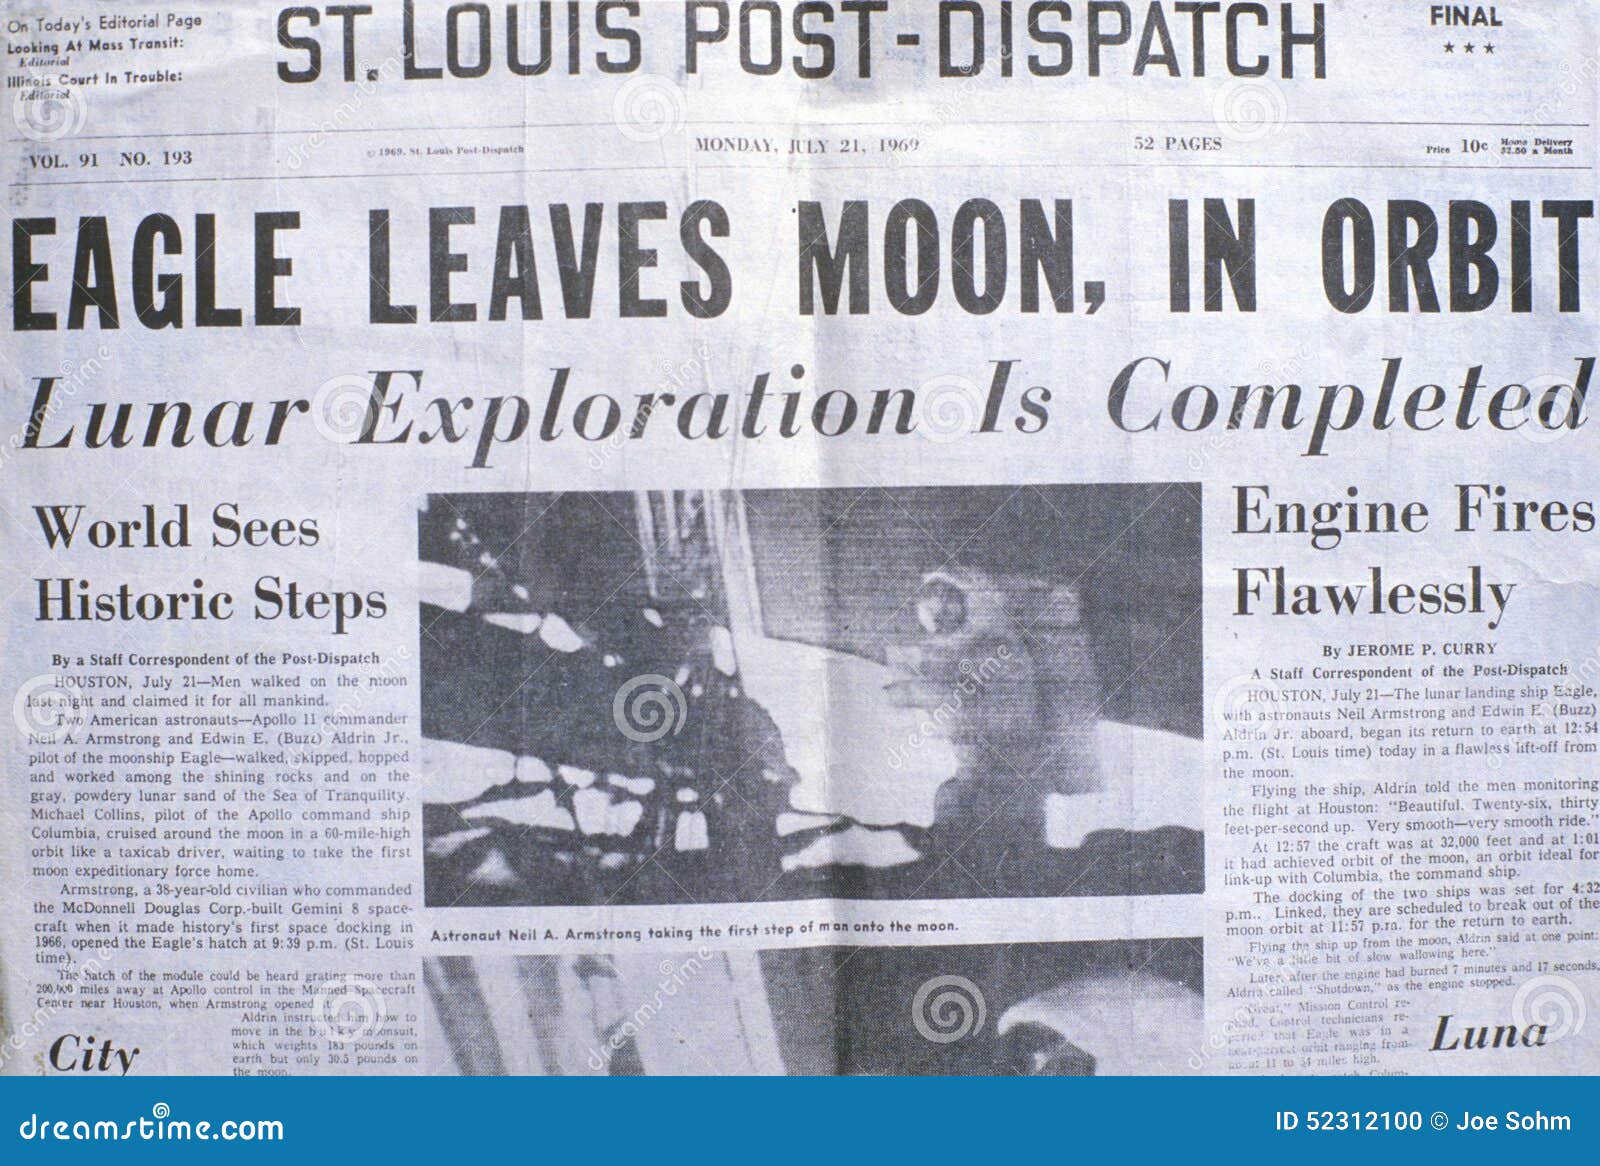 St Louis Post-Dispatch Newspaper Displays Apollo 11 Moon Mission, July 21, 1969 Editorial Image ...